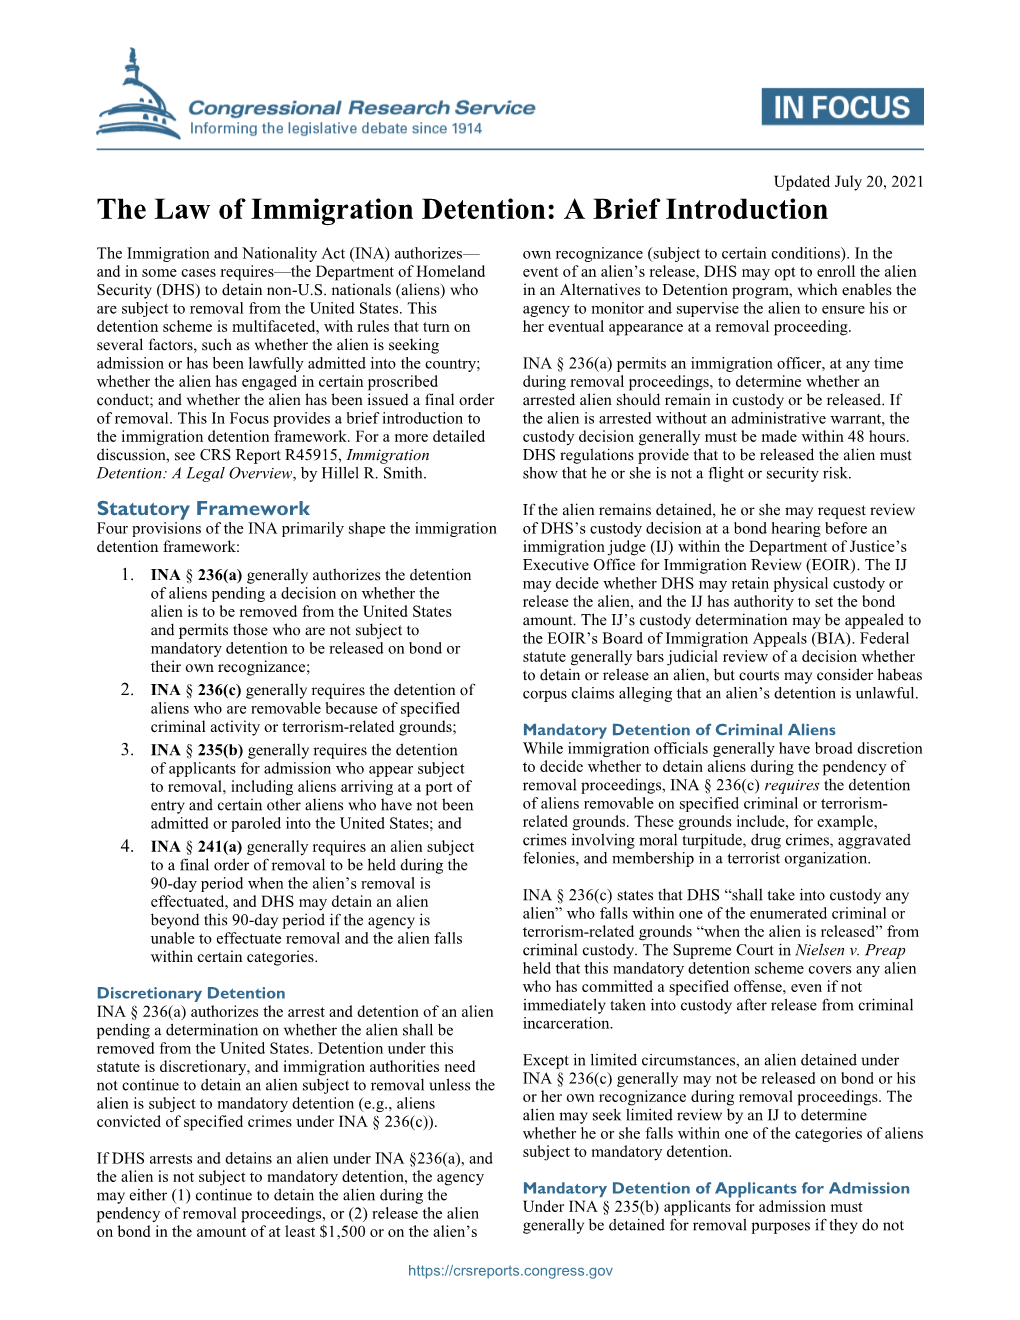 The Law of Immigration Detention: a Brief Introduction